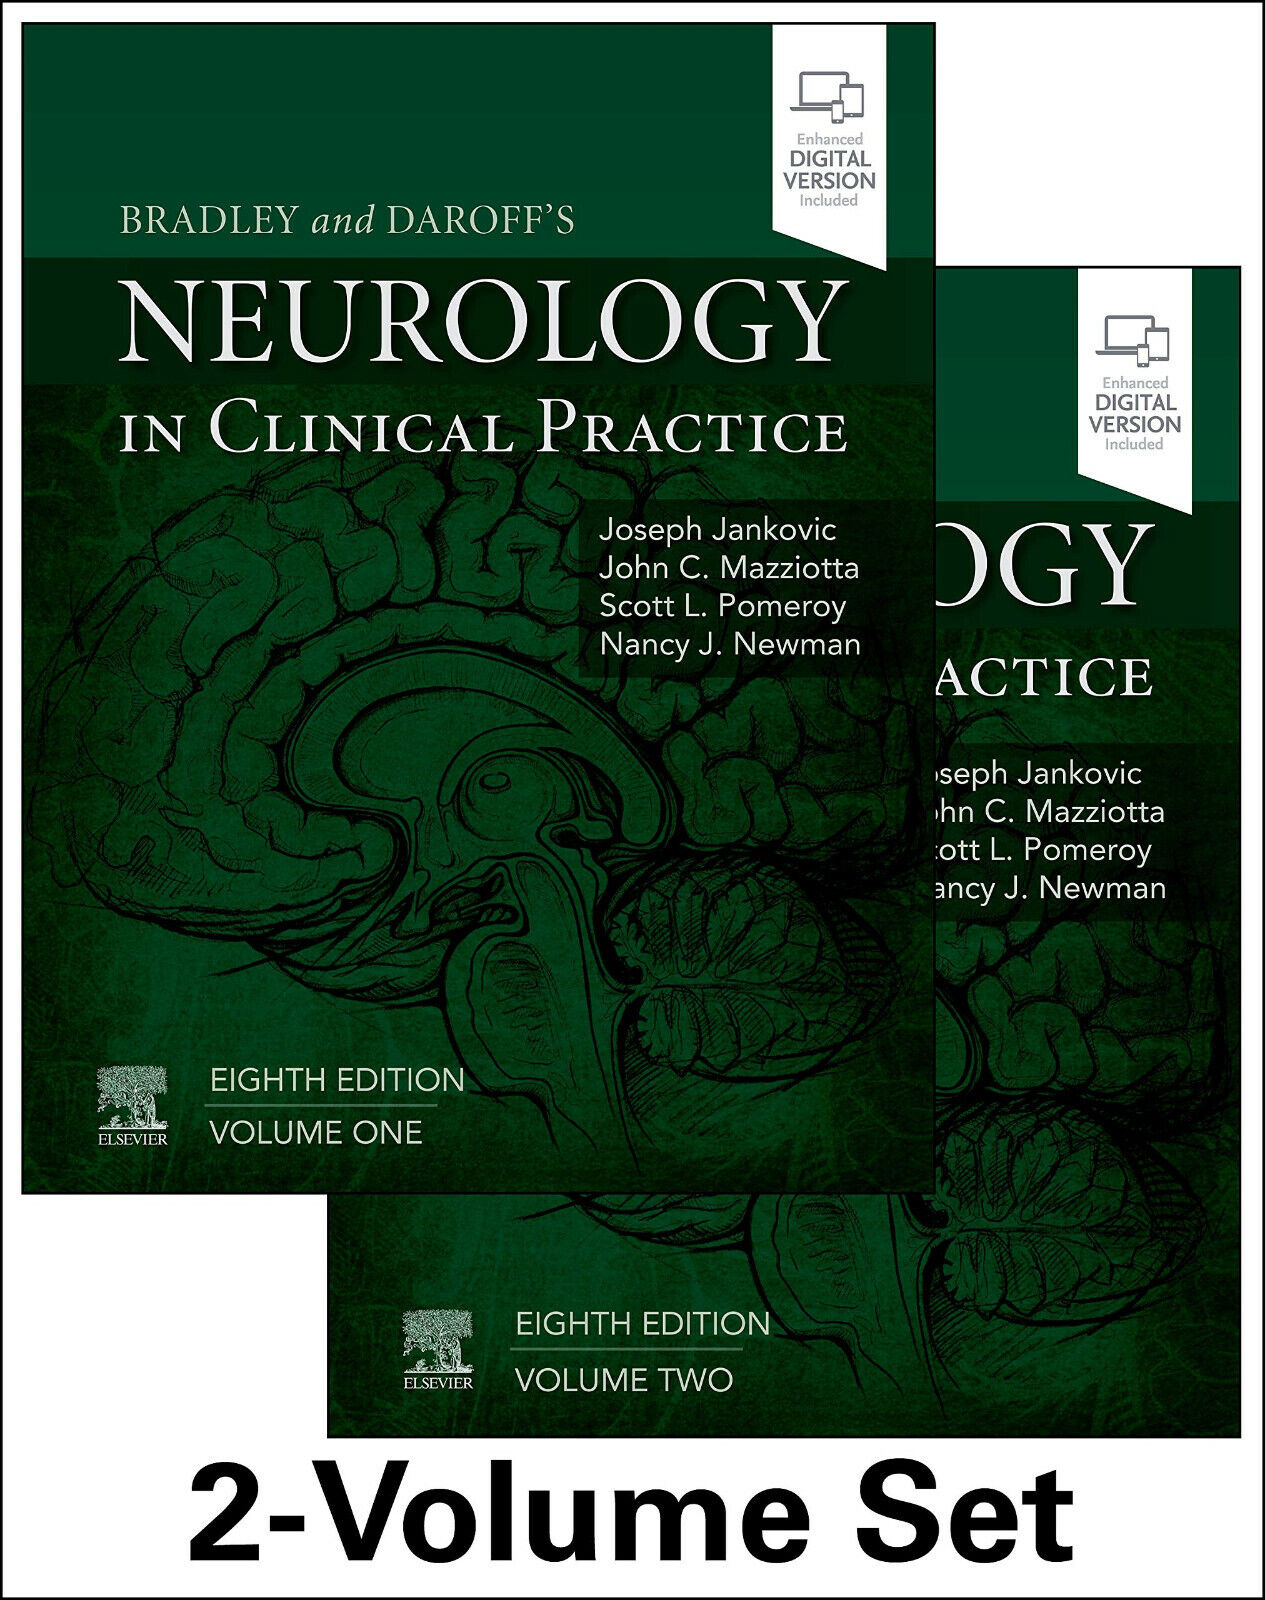 Bradley and Daroff's Neurology in Clinical Practice - Elsevier - 2021